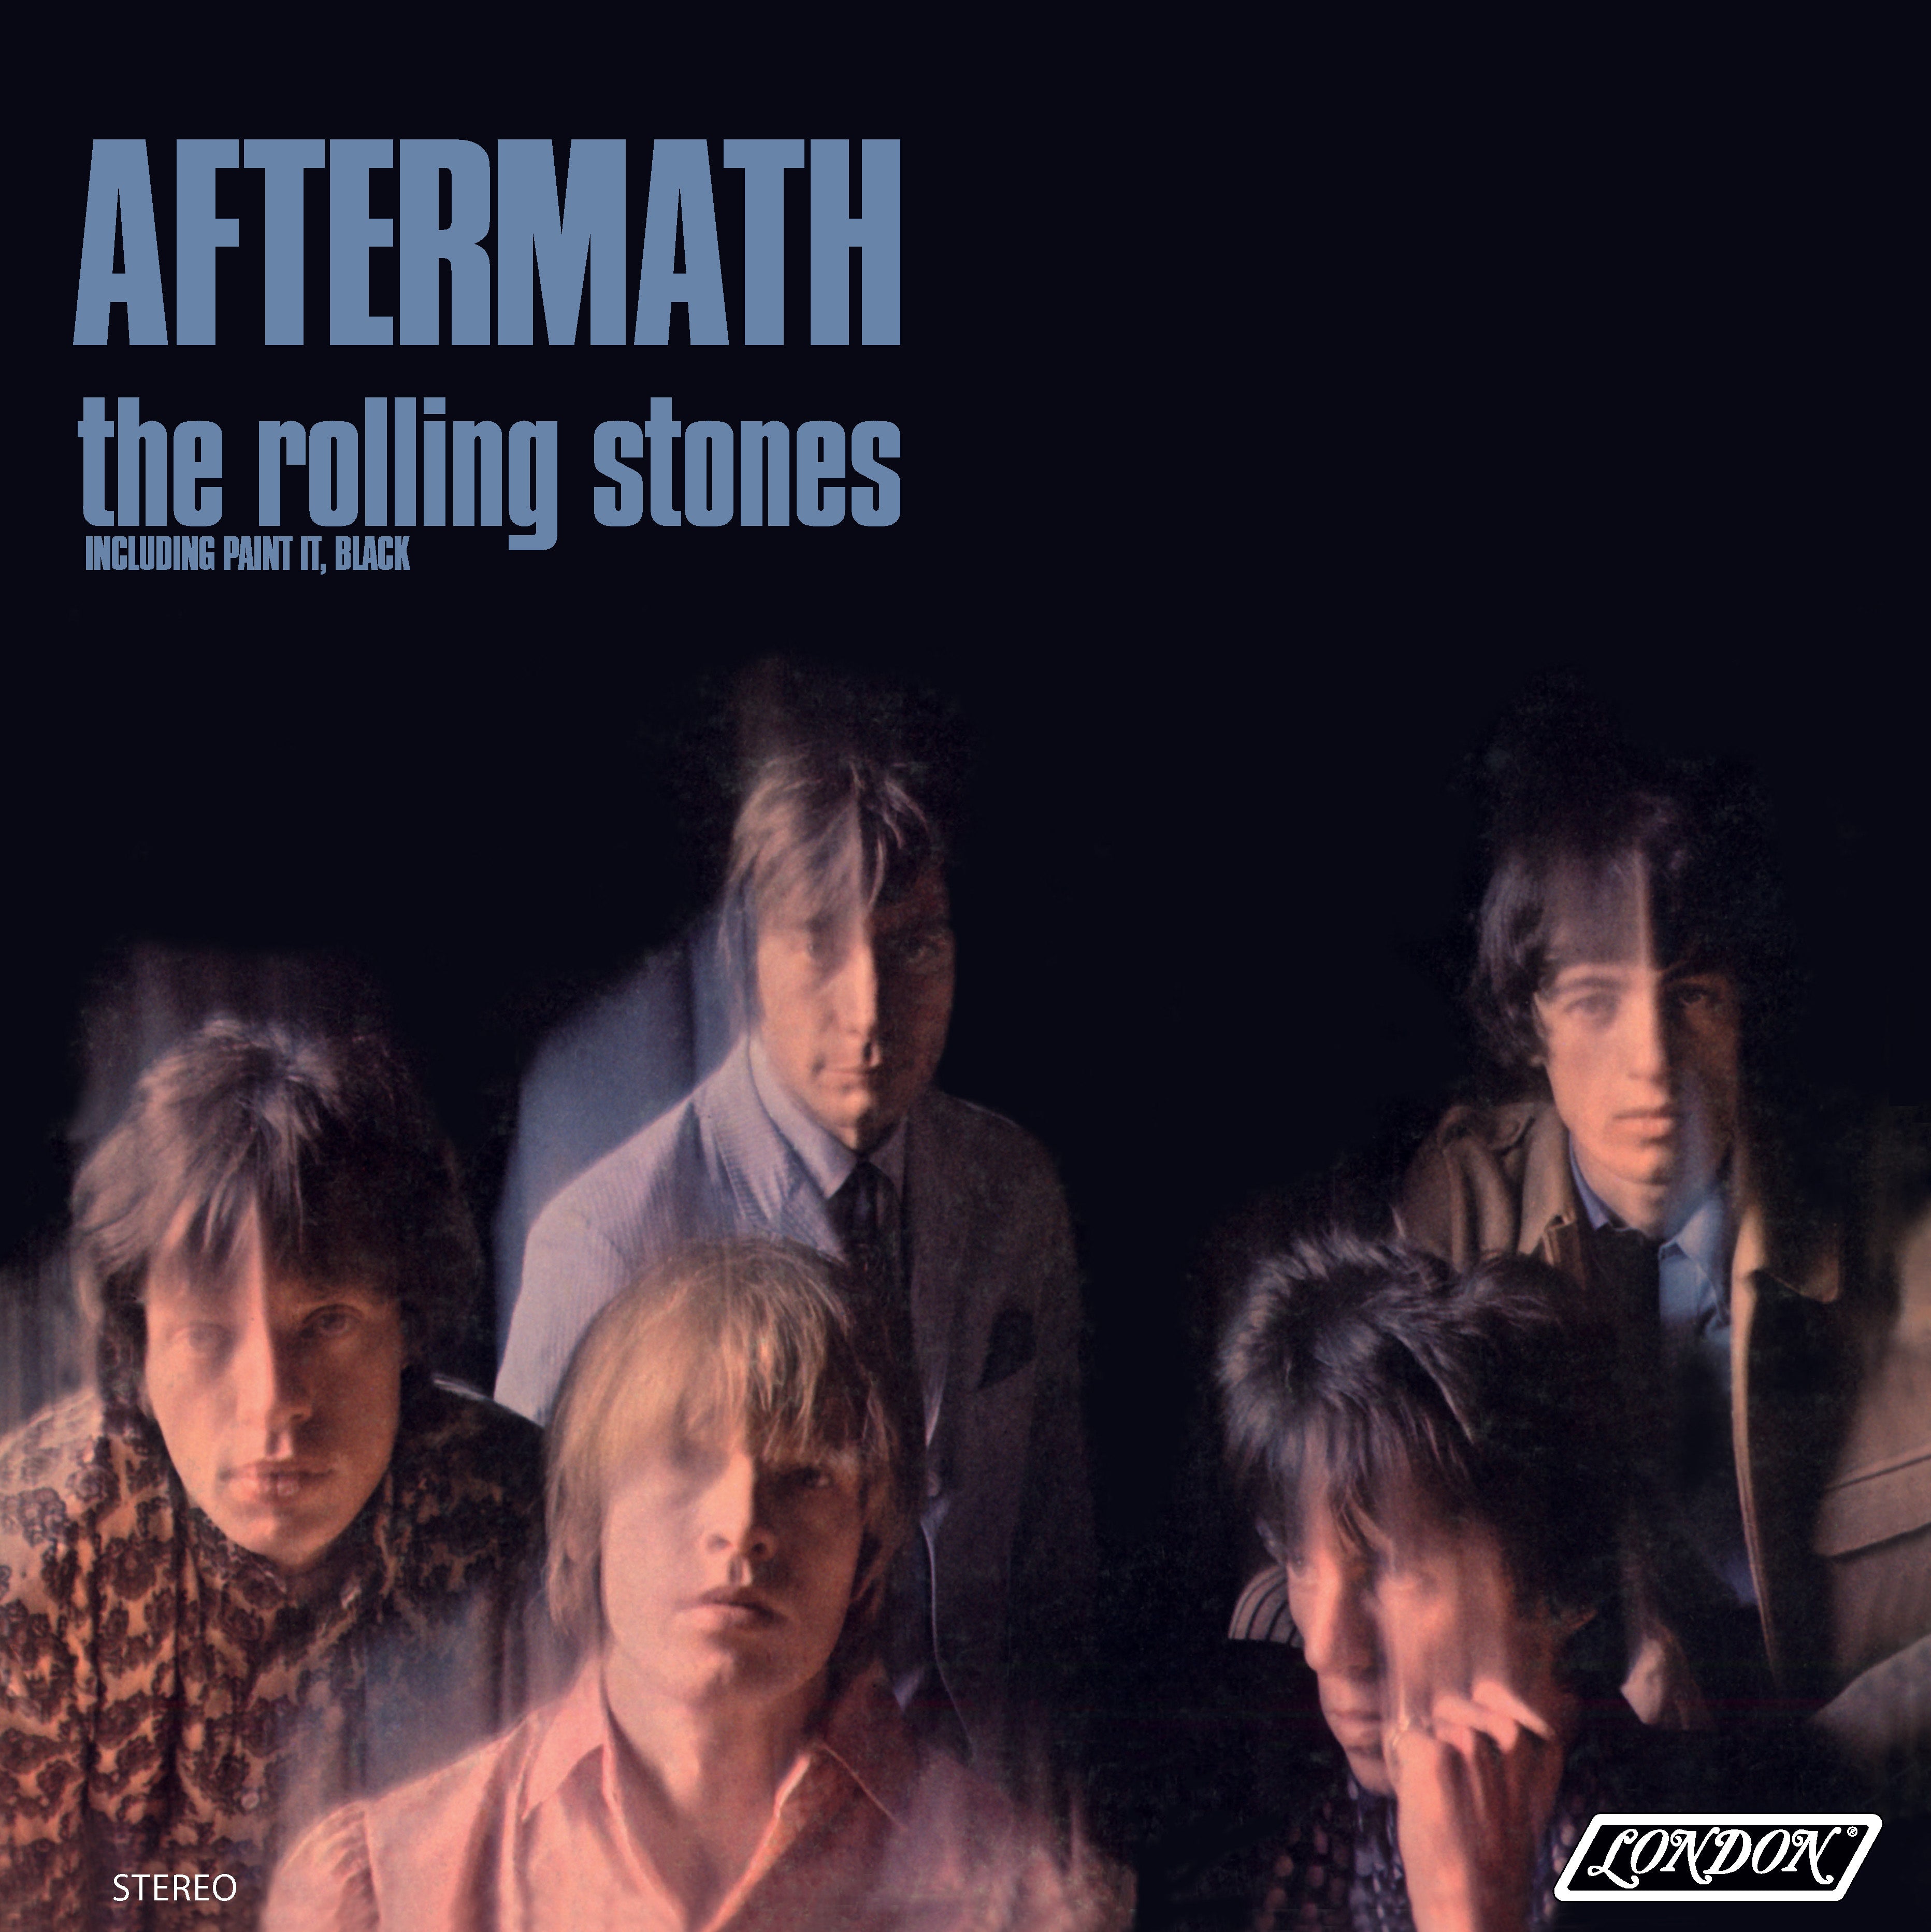 The Rolling Stones - Aftermath (US Edition): Vinyl LP